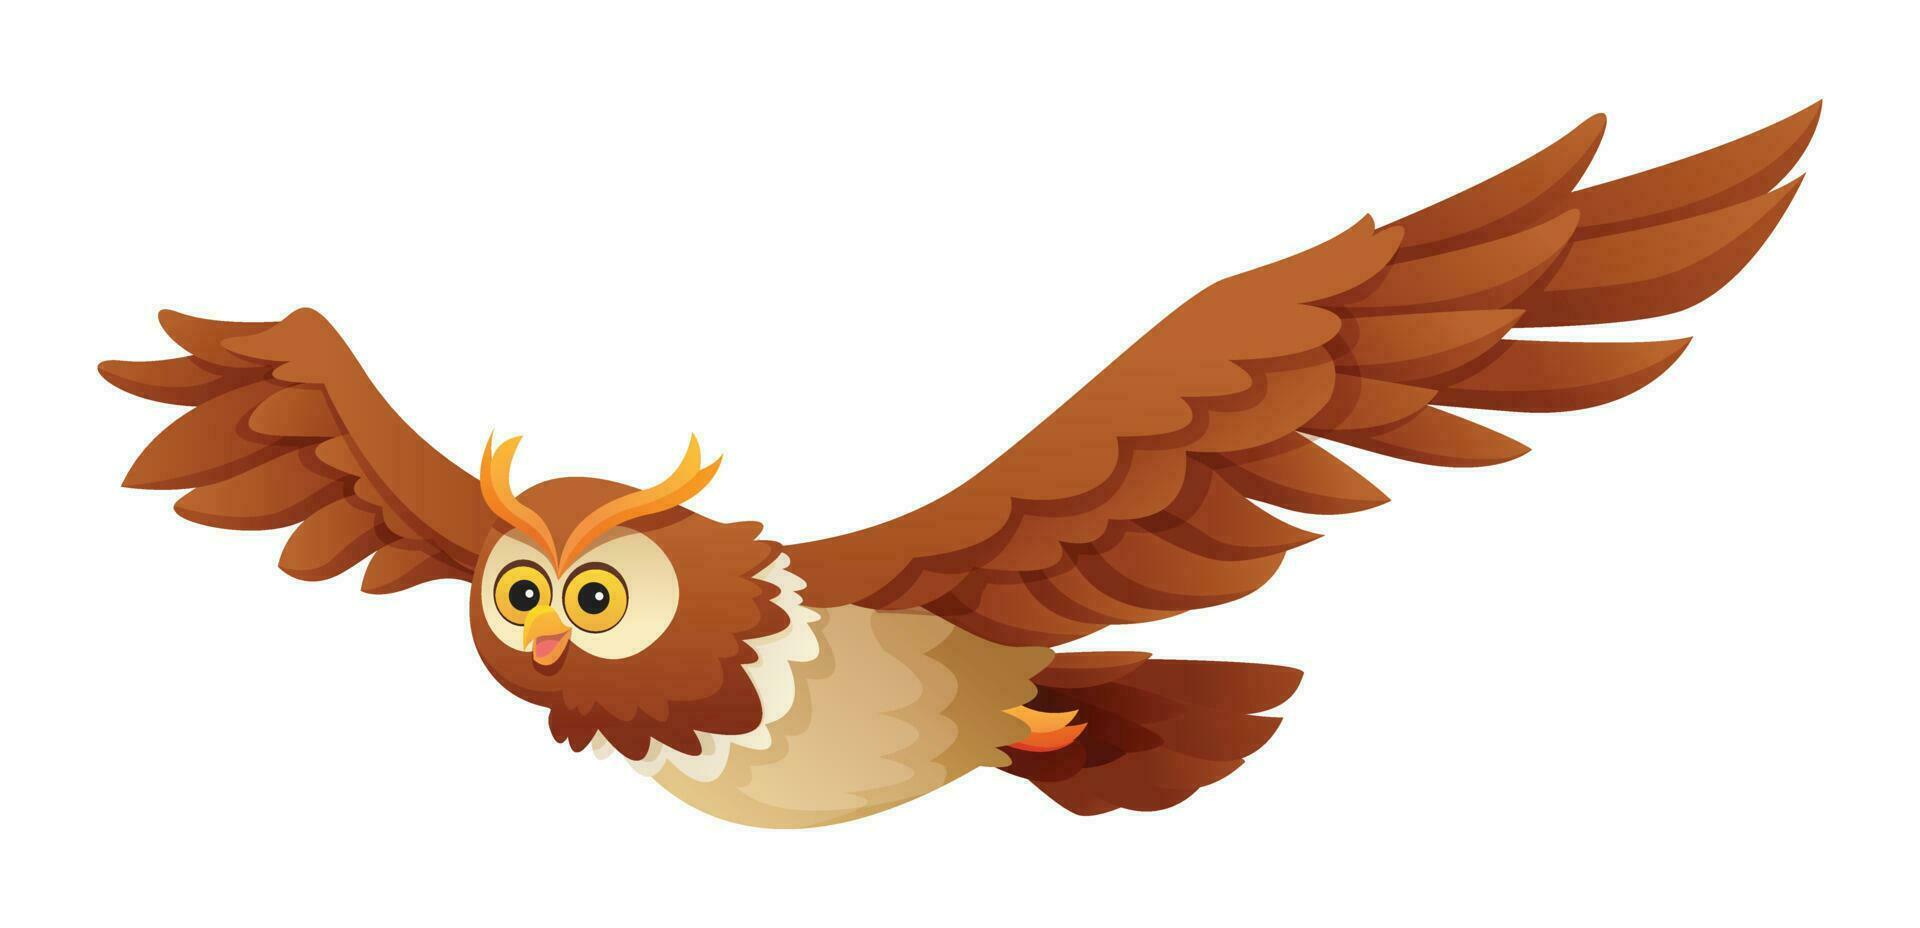 Cute owl flying cartoon illustration isolated on white background vector